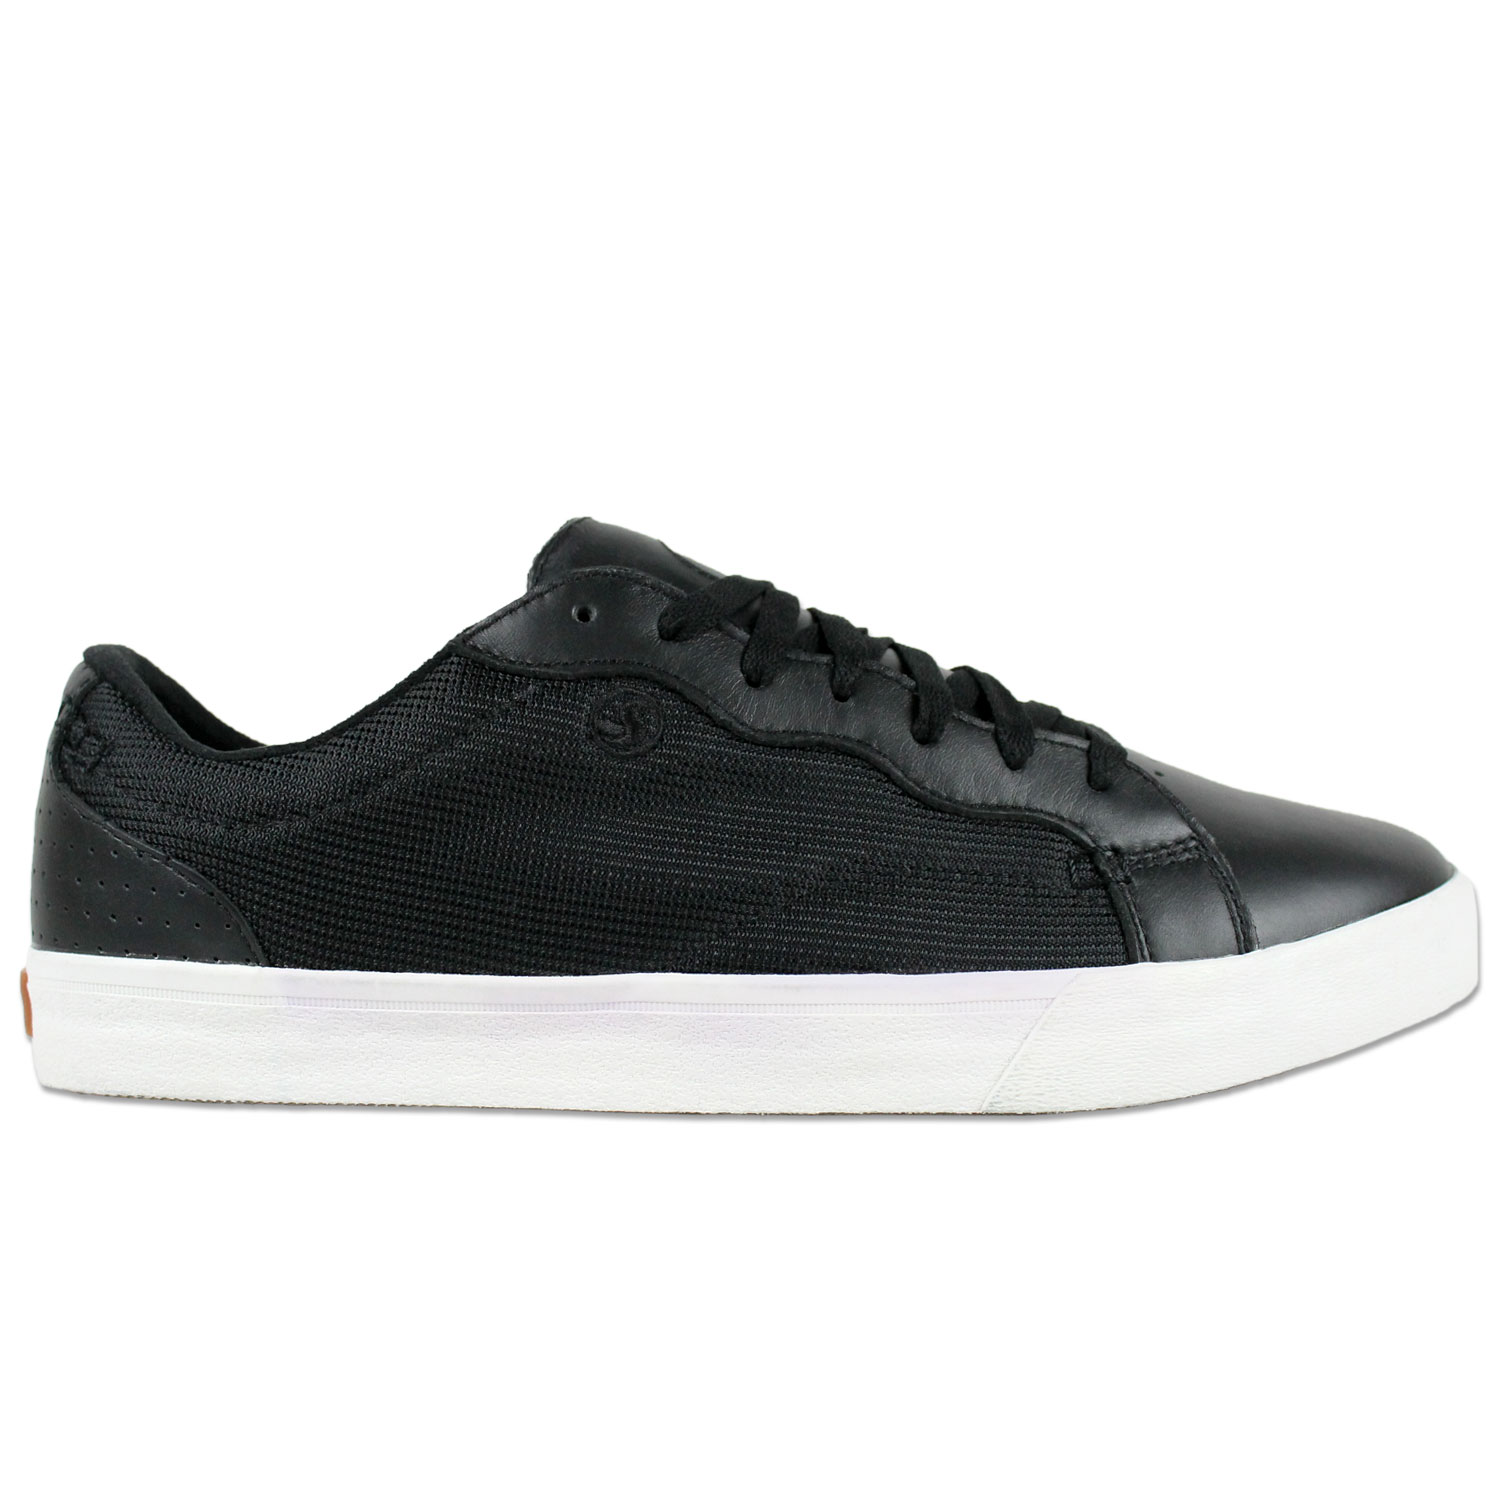 DVS Skateboard SHOES Standard Lo Black Leather Ray SG - BRAND NEW IN ...